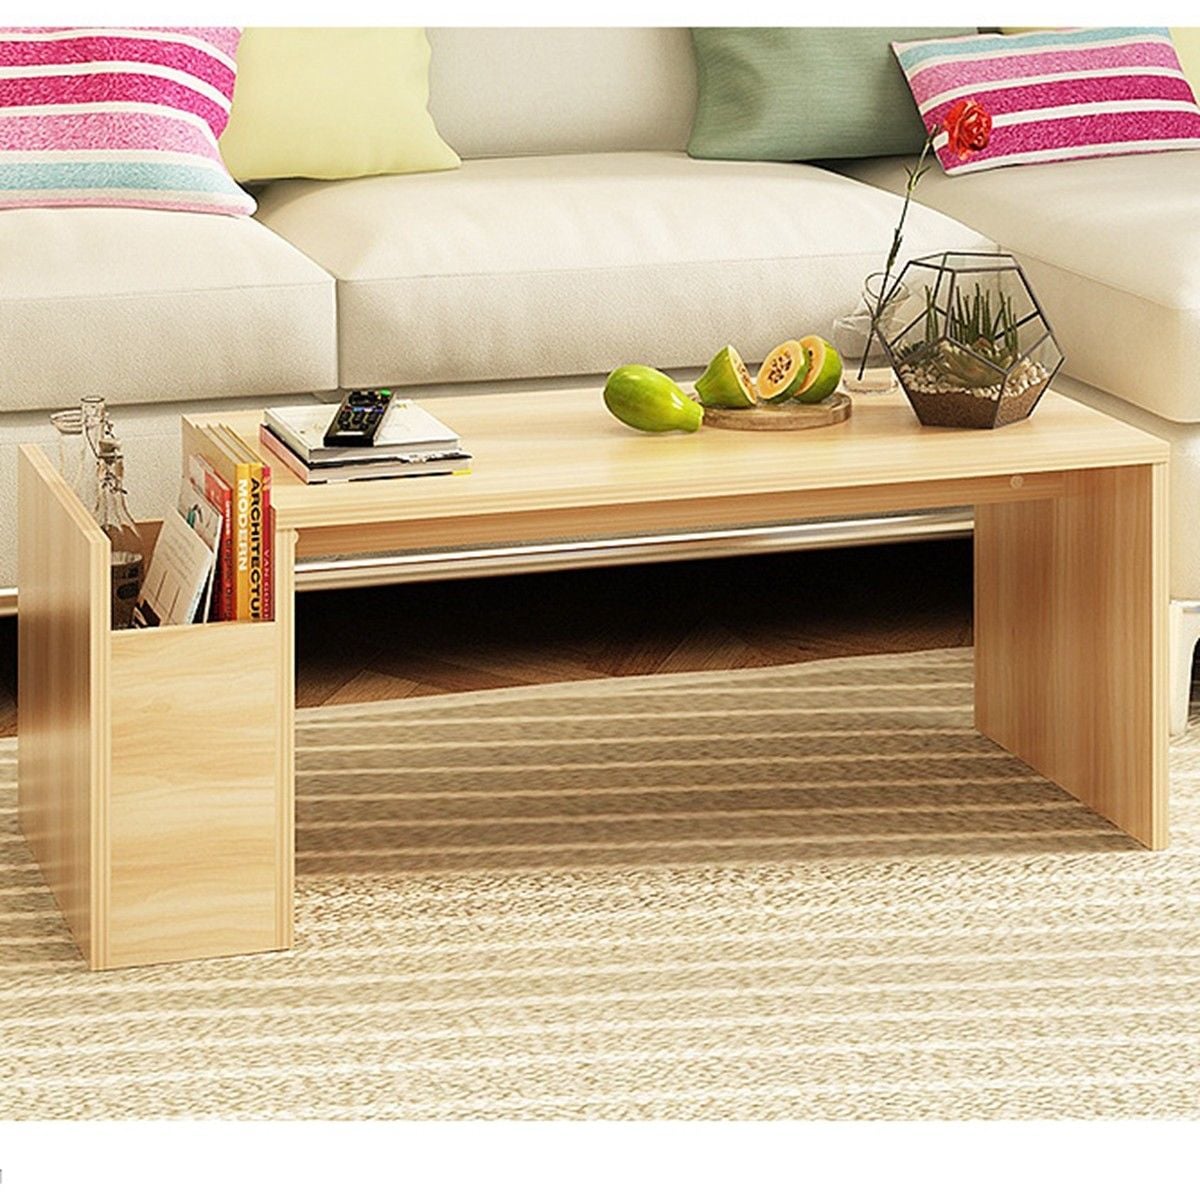 Cheap Modern Coffee Table : 10 Modern Coffee Table Ideas For Every Style Budget Laptrinhx News - It looks both open and closed at the same time with the lower shelf showing the underneath off.